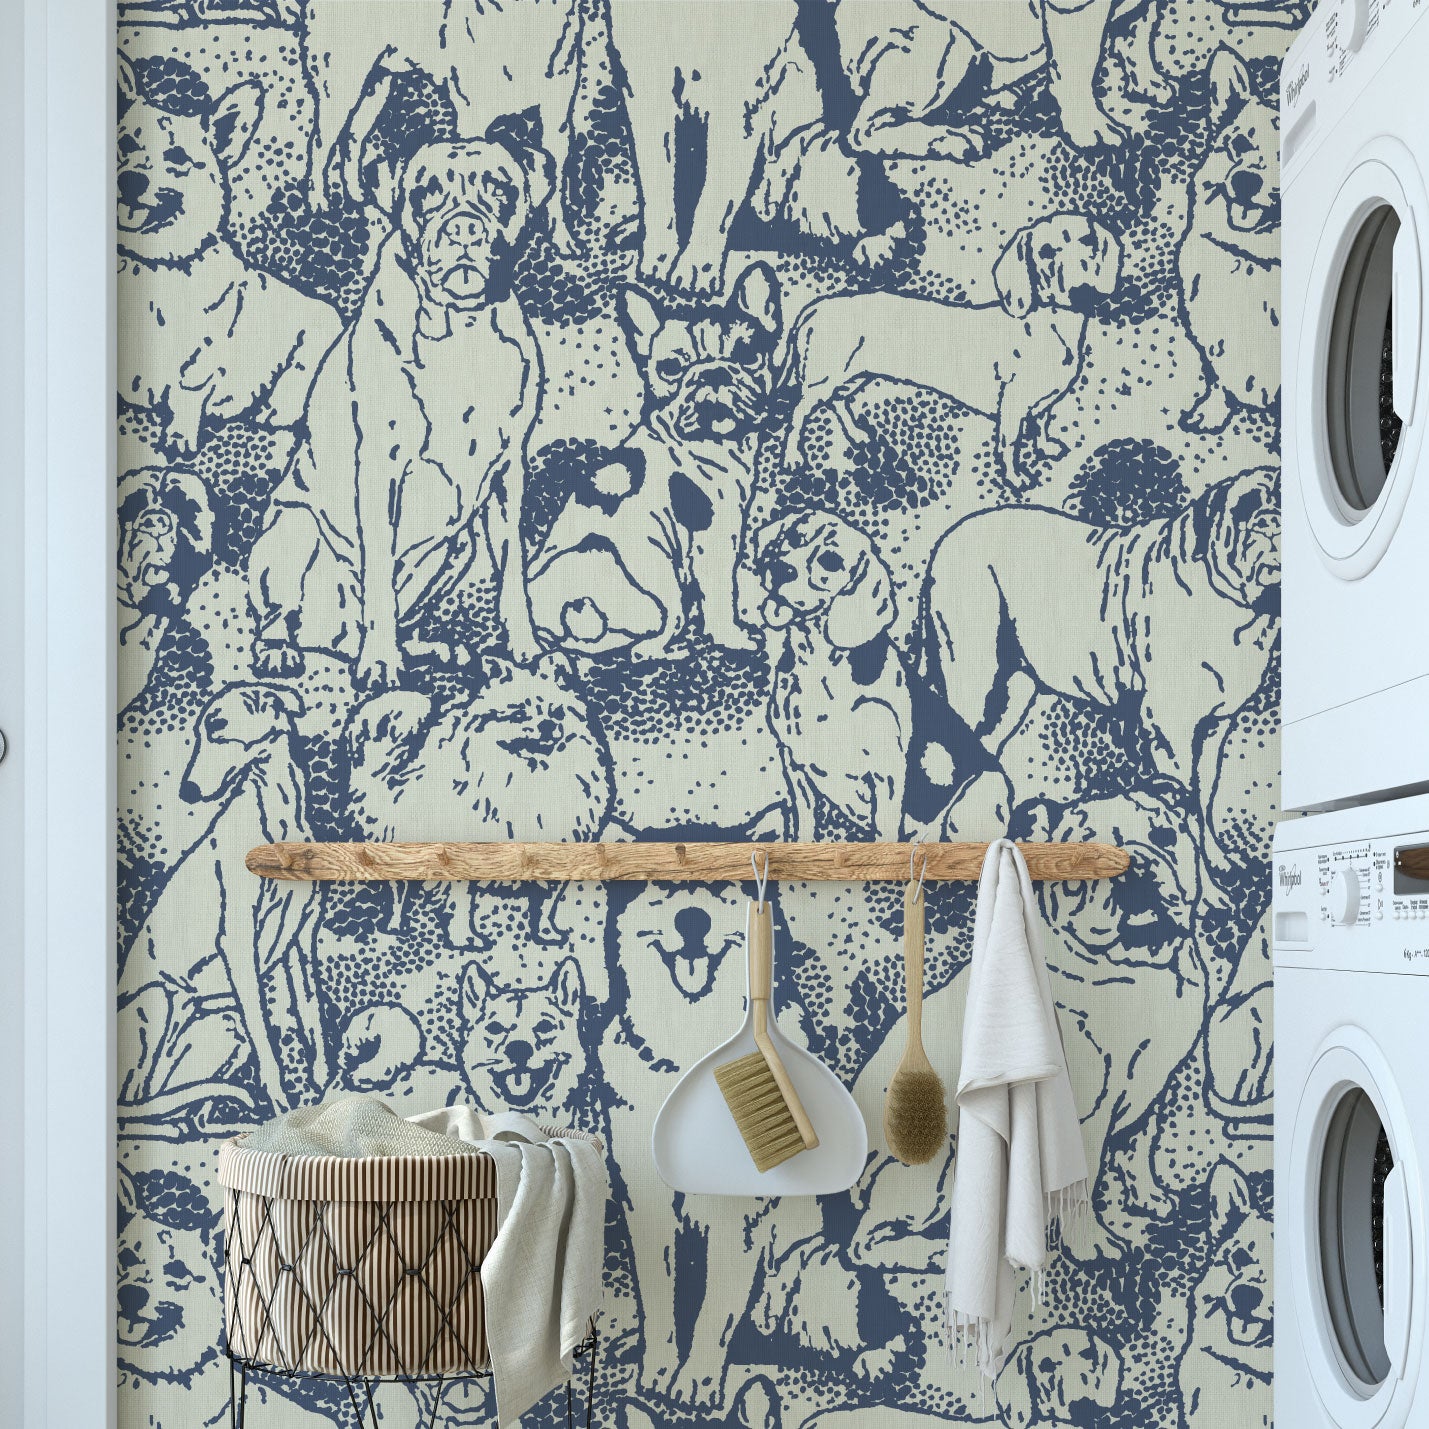 dog printed paper weave paperweave wallpaper puppy huskie, bulldogs, mastiff, wiener, beagles, yorkie Natural Textured Eco-Friendly Non-toxic High-quality Sustainable Interior Design Bold Custom kids mudroom veterinary grooming animal pink olive cream white off-white navy slate grey neutral